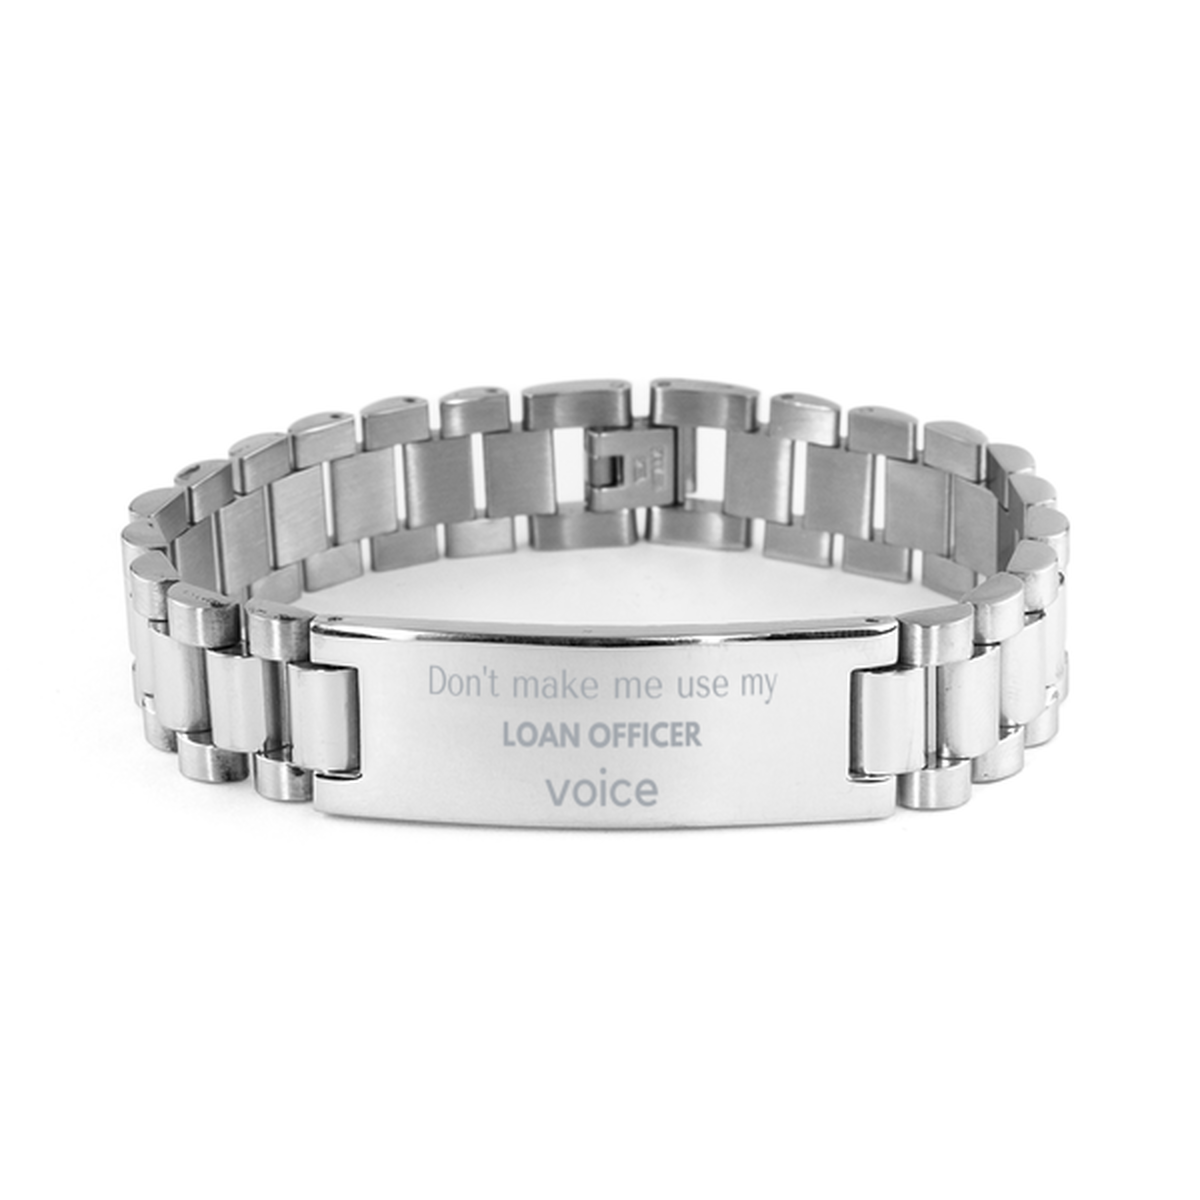 Don't make me use my Loan Officer voice, Sarcasm Loan Officer Gifts, Christmas Loan Officer Ladder Stainless Steel Bracelet Birthday Unique Gifts For Loan Officer Coworkers, Men, Women, Colleague, Friends